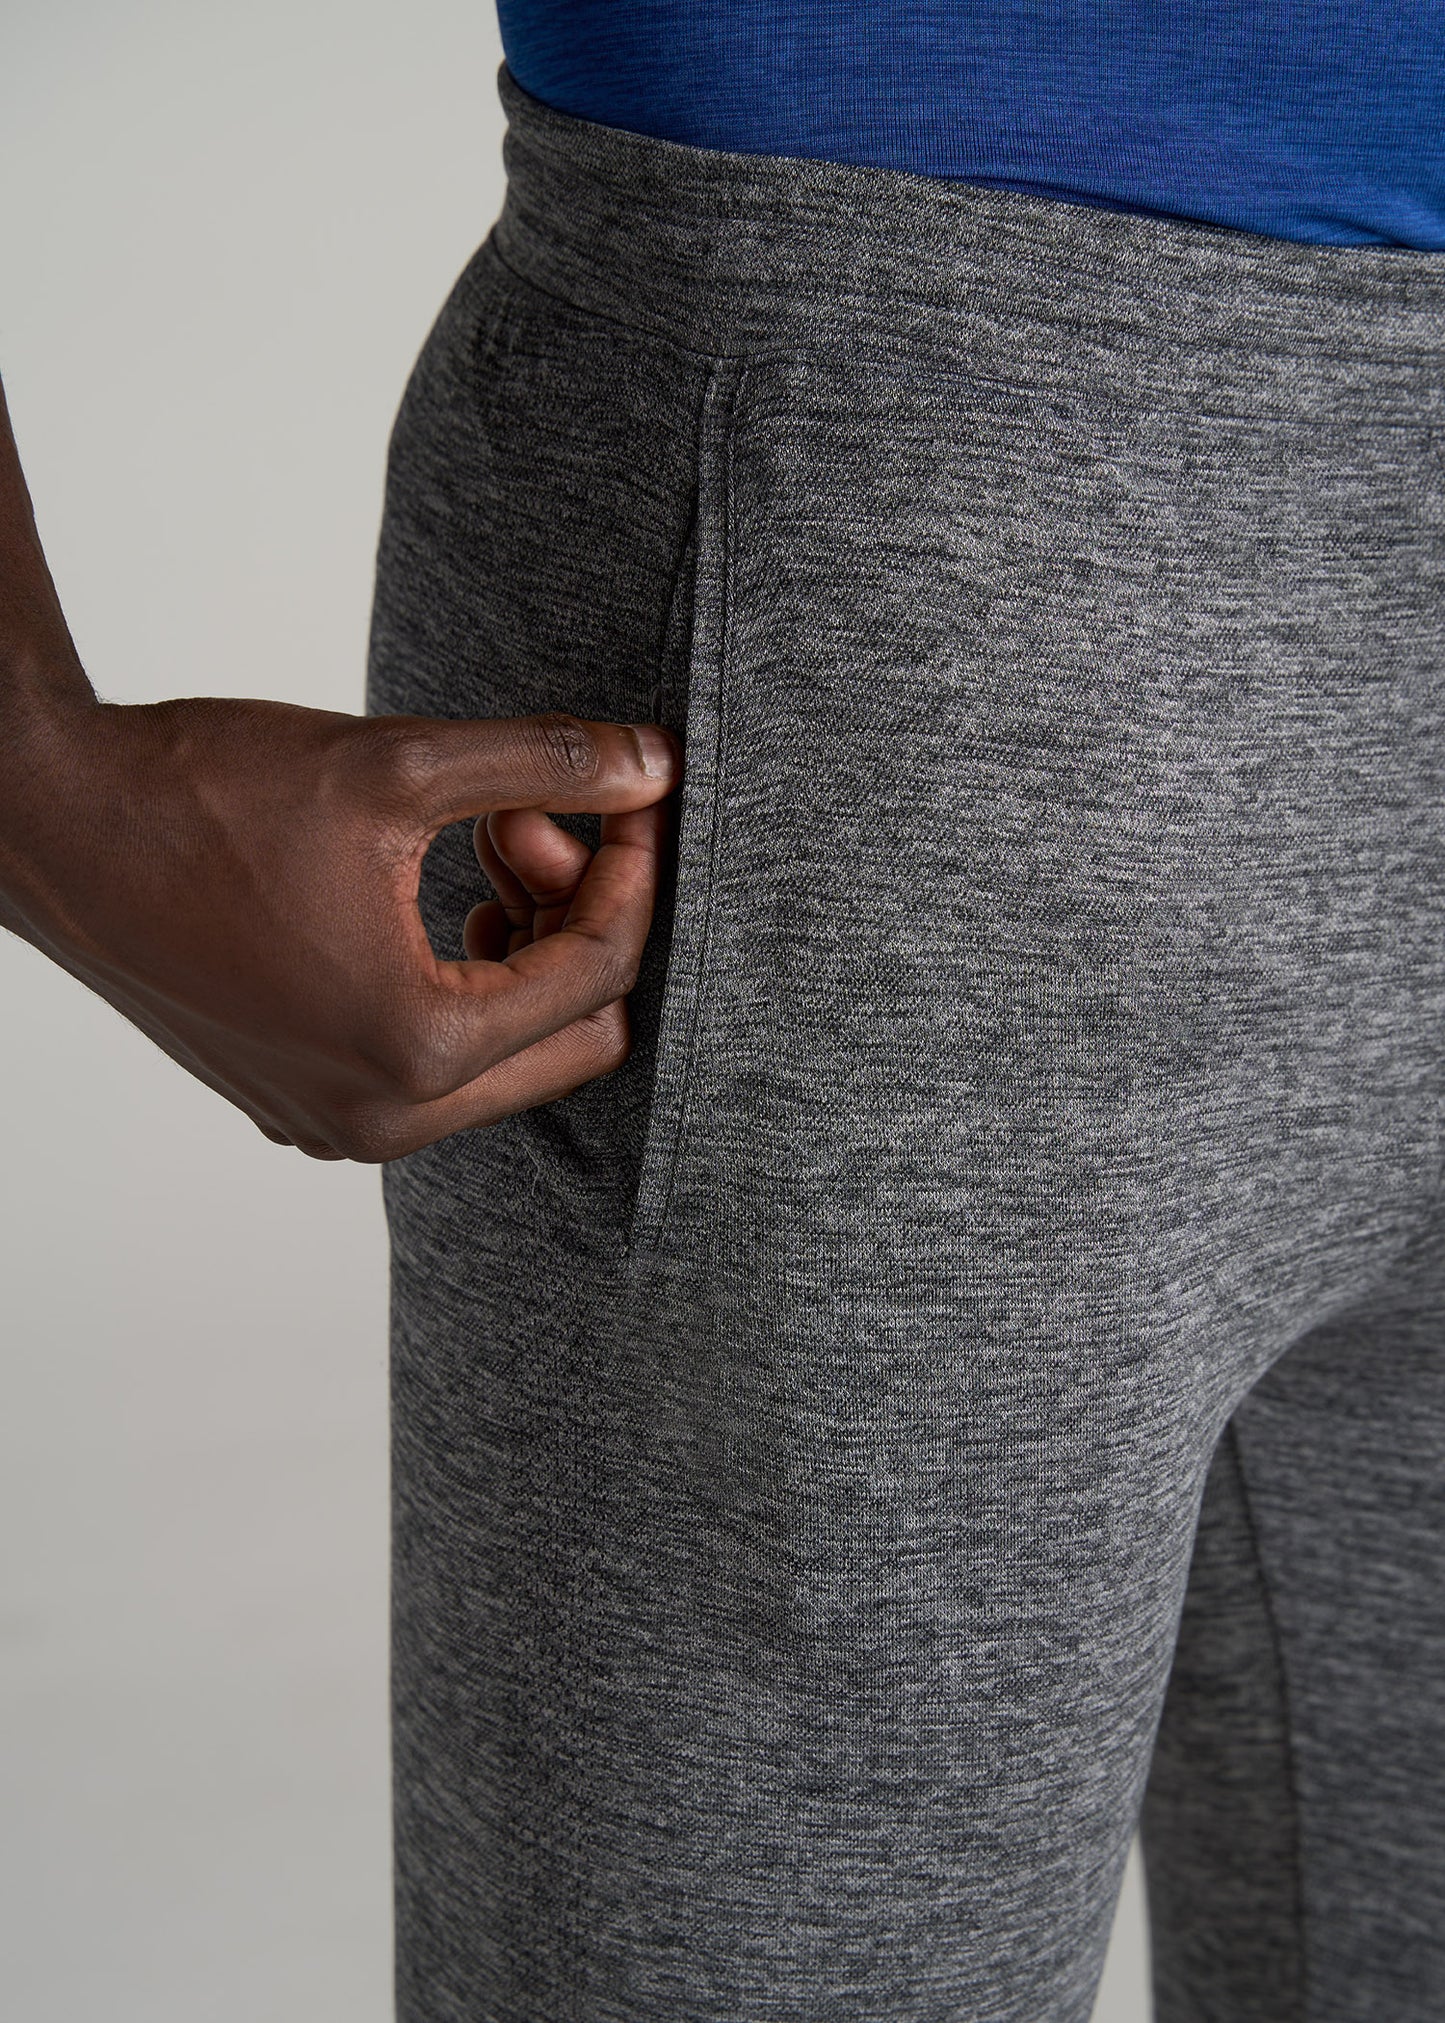    American-Tall-Men-AT-Performance-Engineered-Joggers-GreyMix-detail